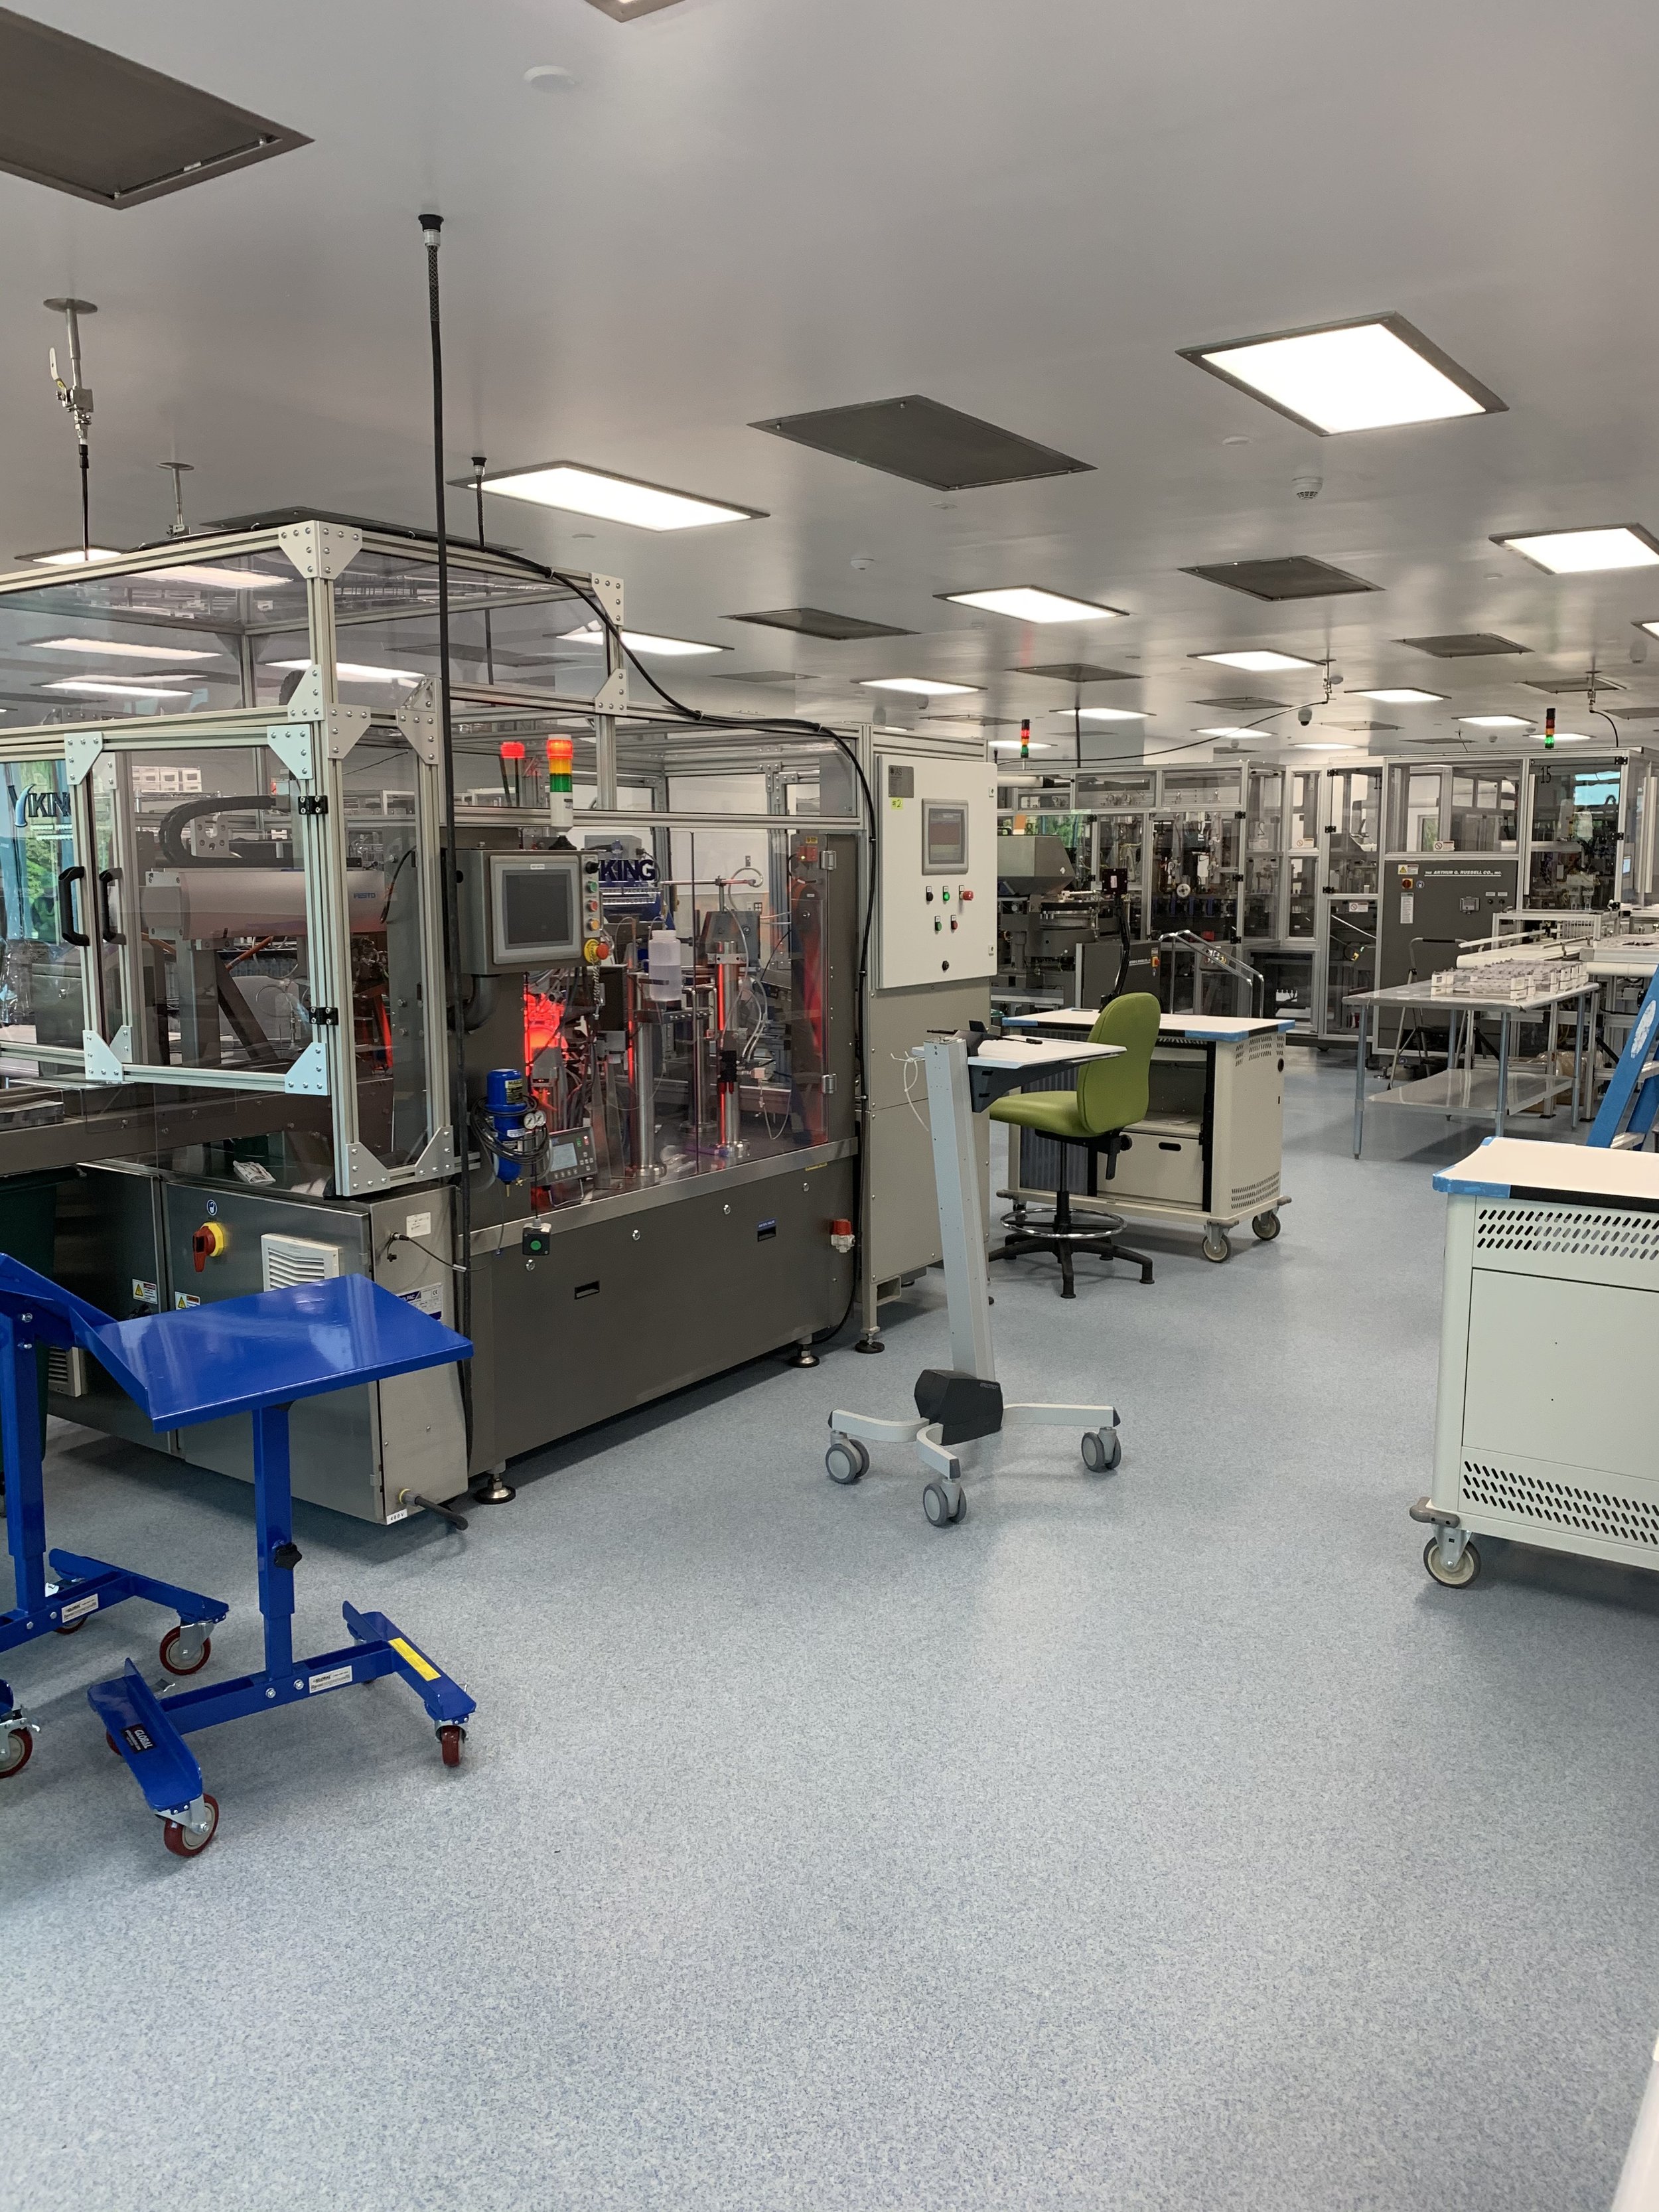 MEDICAL DEVICE MANUFACTURING FACILITY